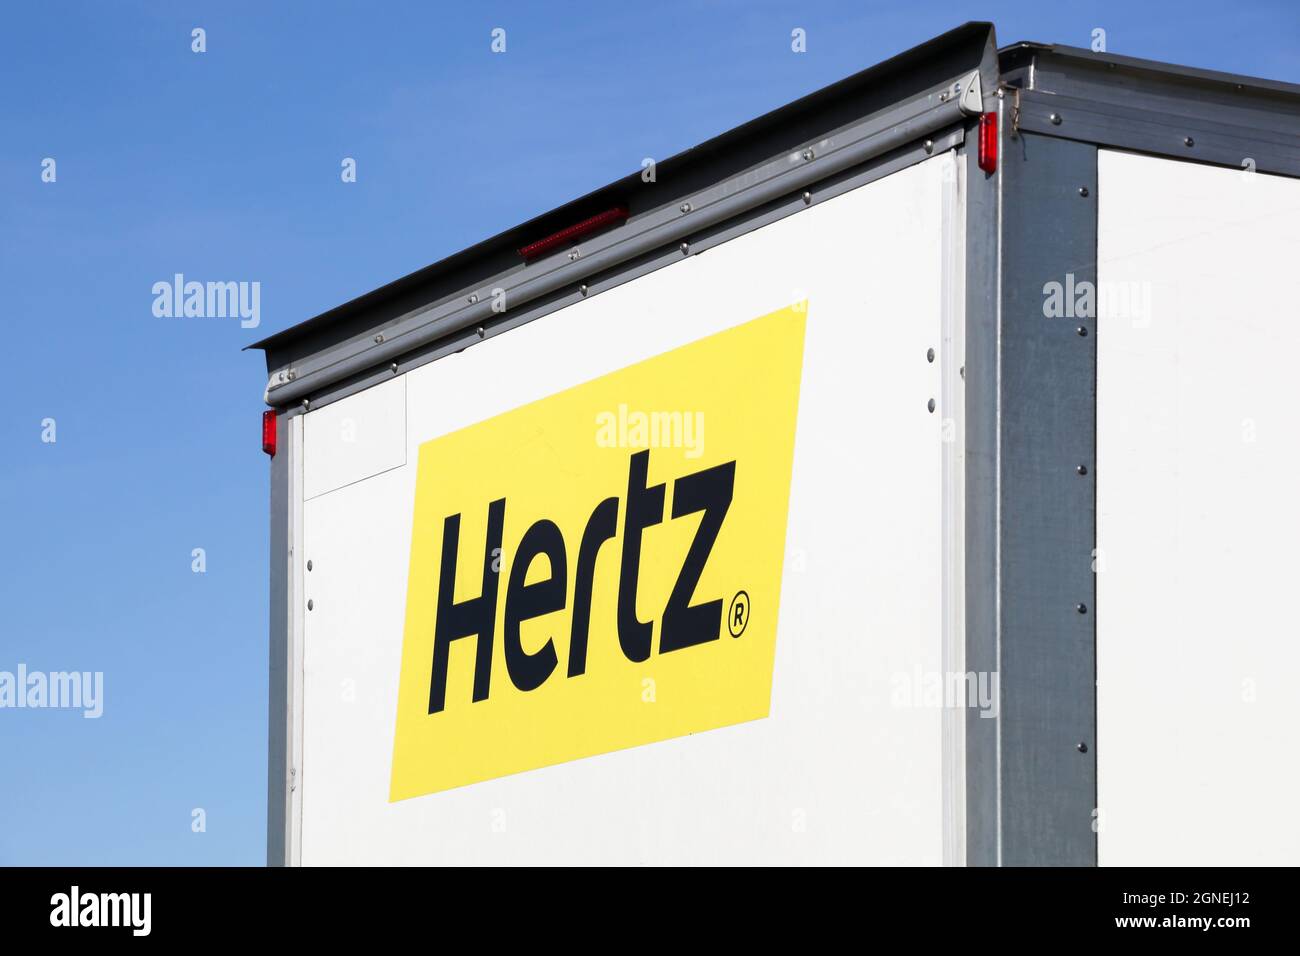 Villefranche sur Saone, France - March 8, 2020: Hertz logo on a truck. Hertz is an American car rental company with international locations Stock Photo